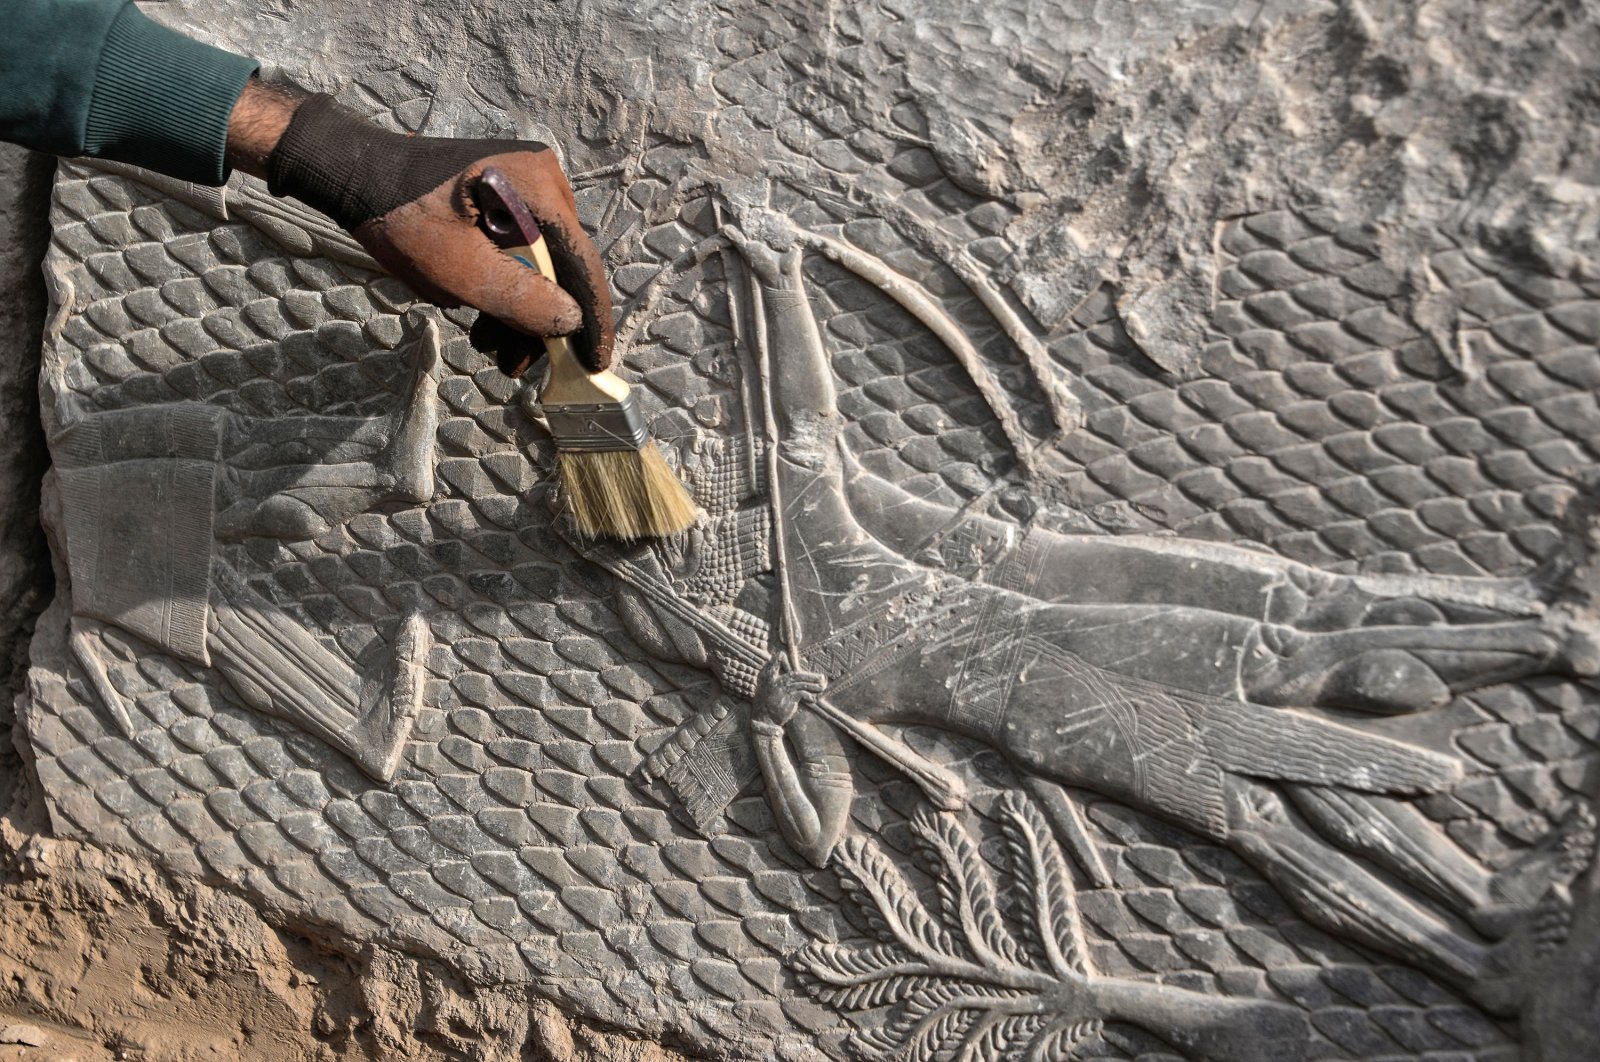 An Iraqi worker excavates a rock-carving relief recently found at the Mashki Gate, one of the monumental gates to the ancient Assyrian city of Nineveh, on the outskirts of Mosul, Iraq, Oct. 19, 2022. (AFP Photo)